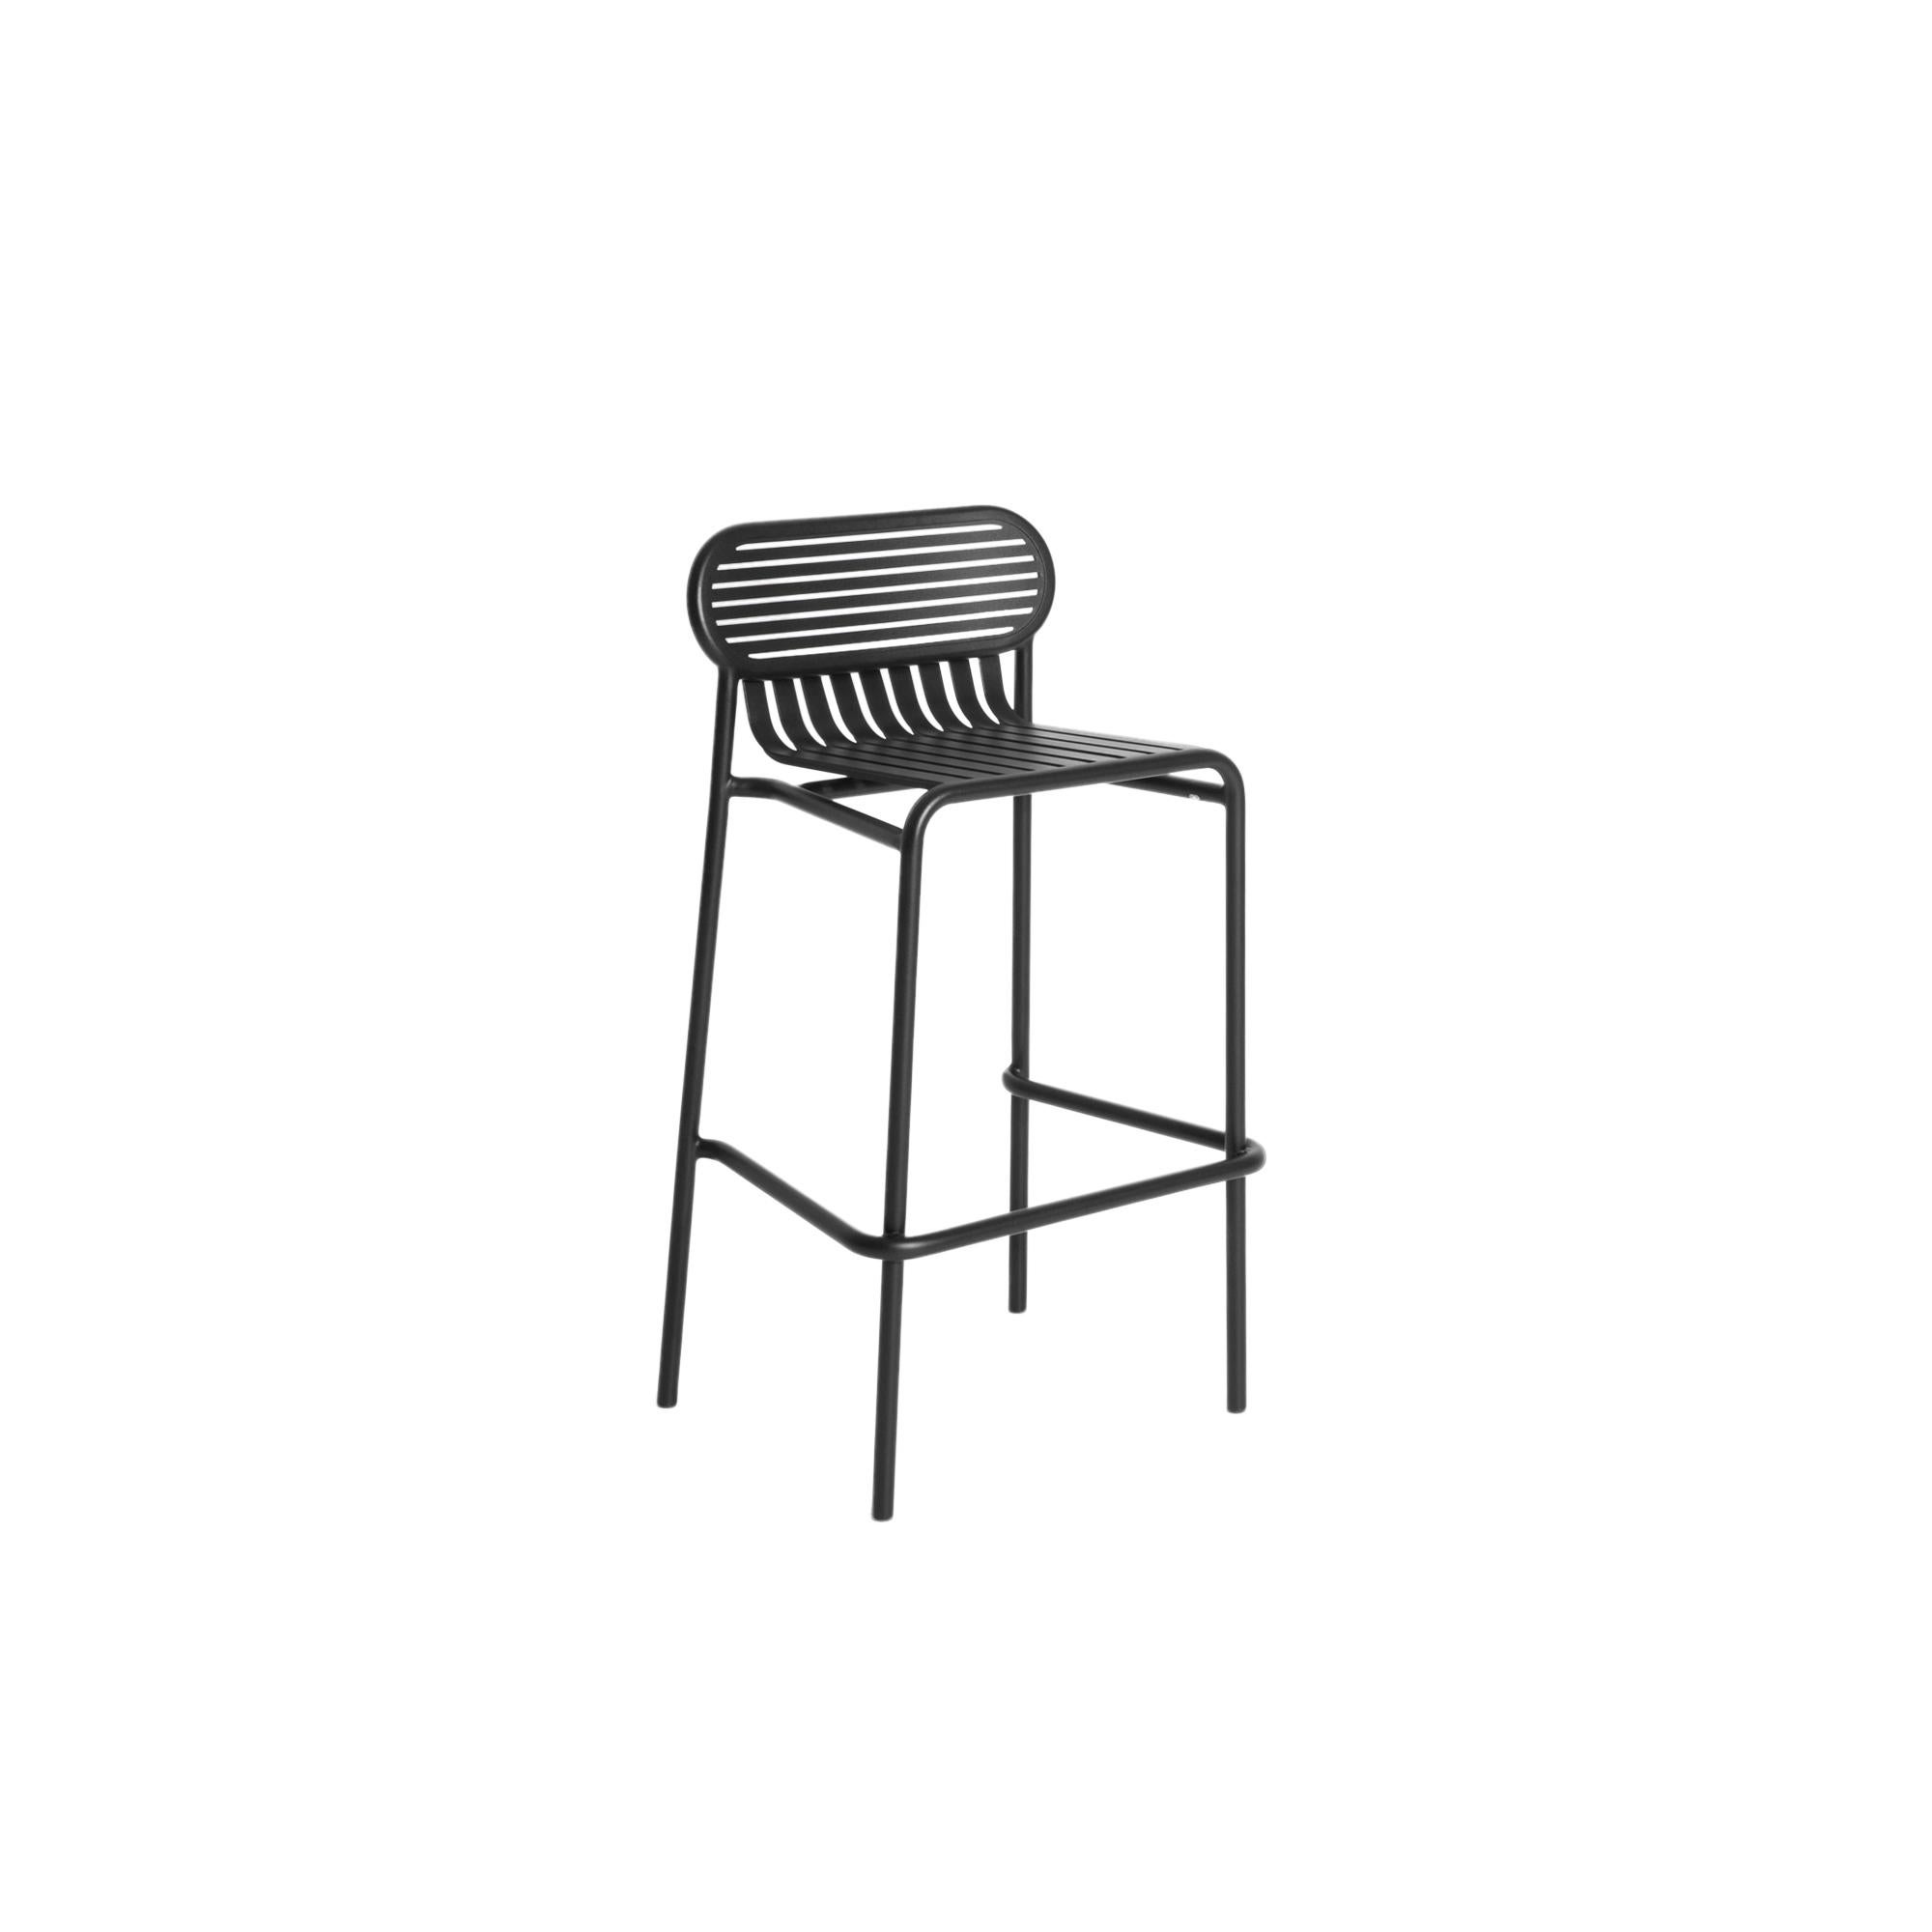 Petite Friture Week-End Bar Stool in Black Aluminium by Studio BrichetZiegler, 2017

The week-end collection is a full range of outdoor furniture, in aluminium grained epoxy paint, matt finish, that includes 18 functions and 8 colours for the